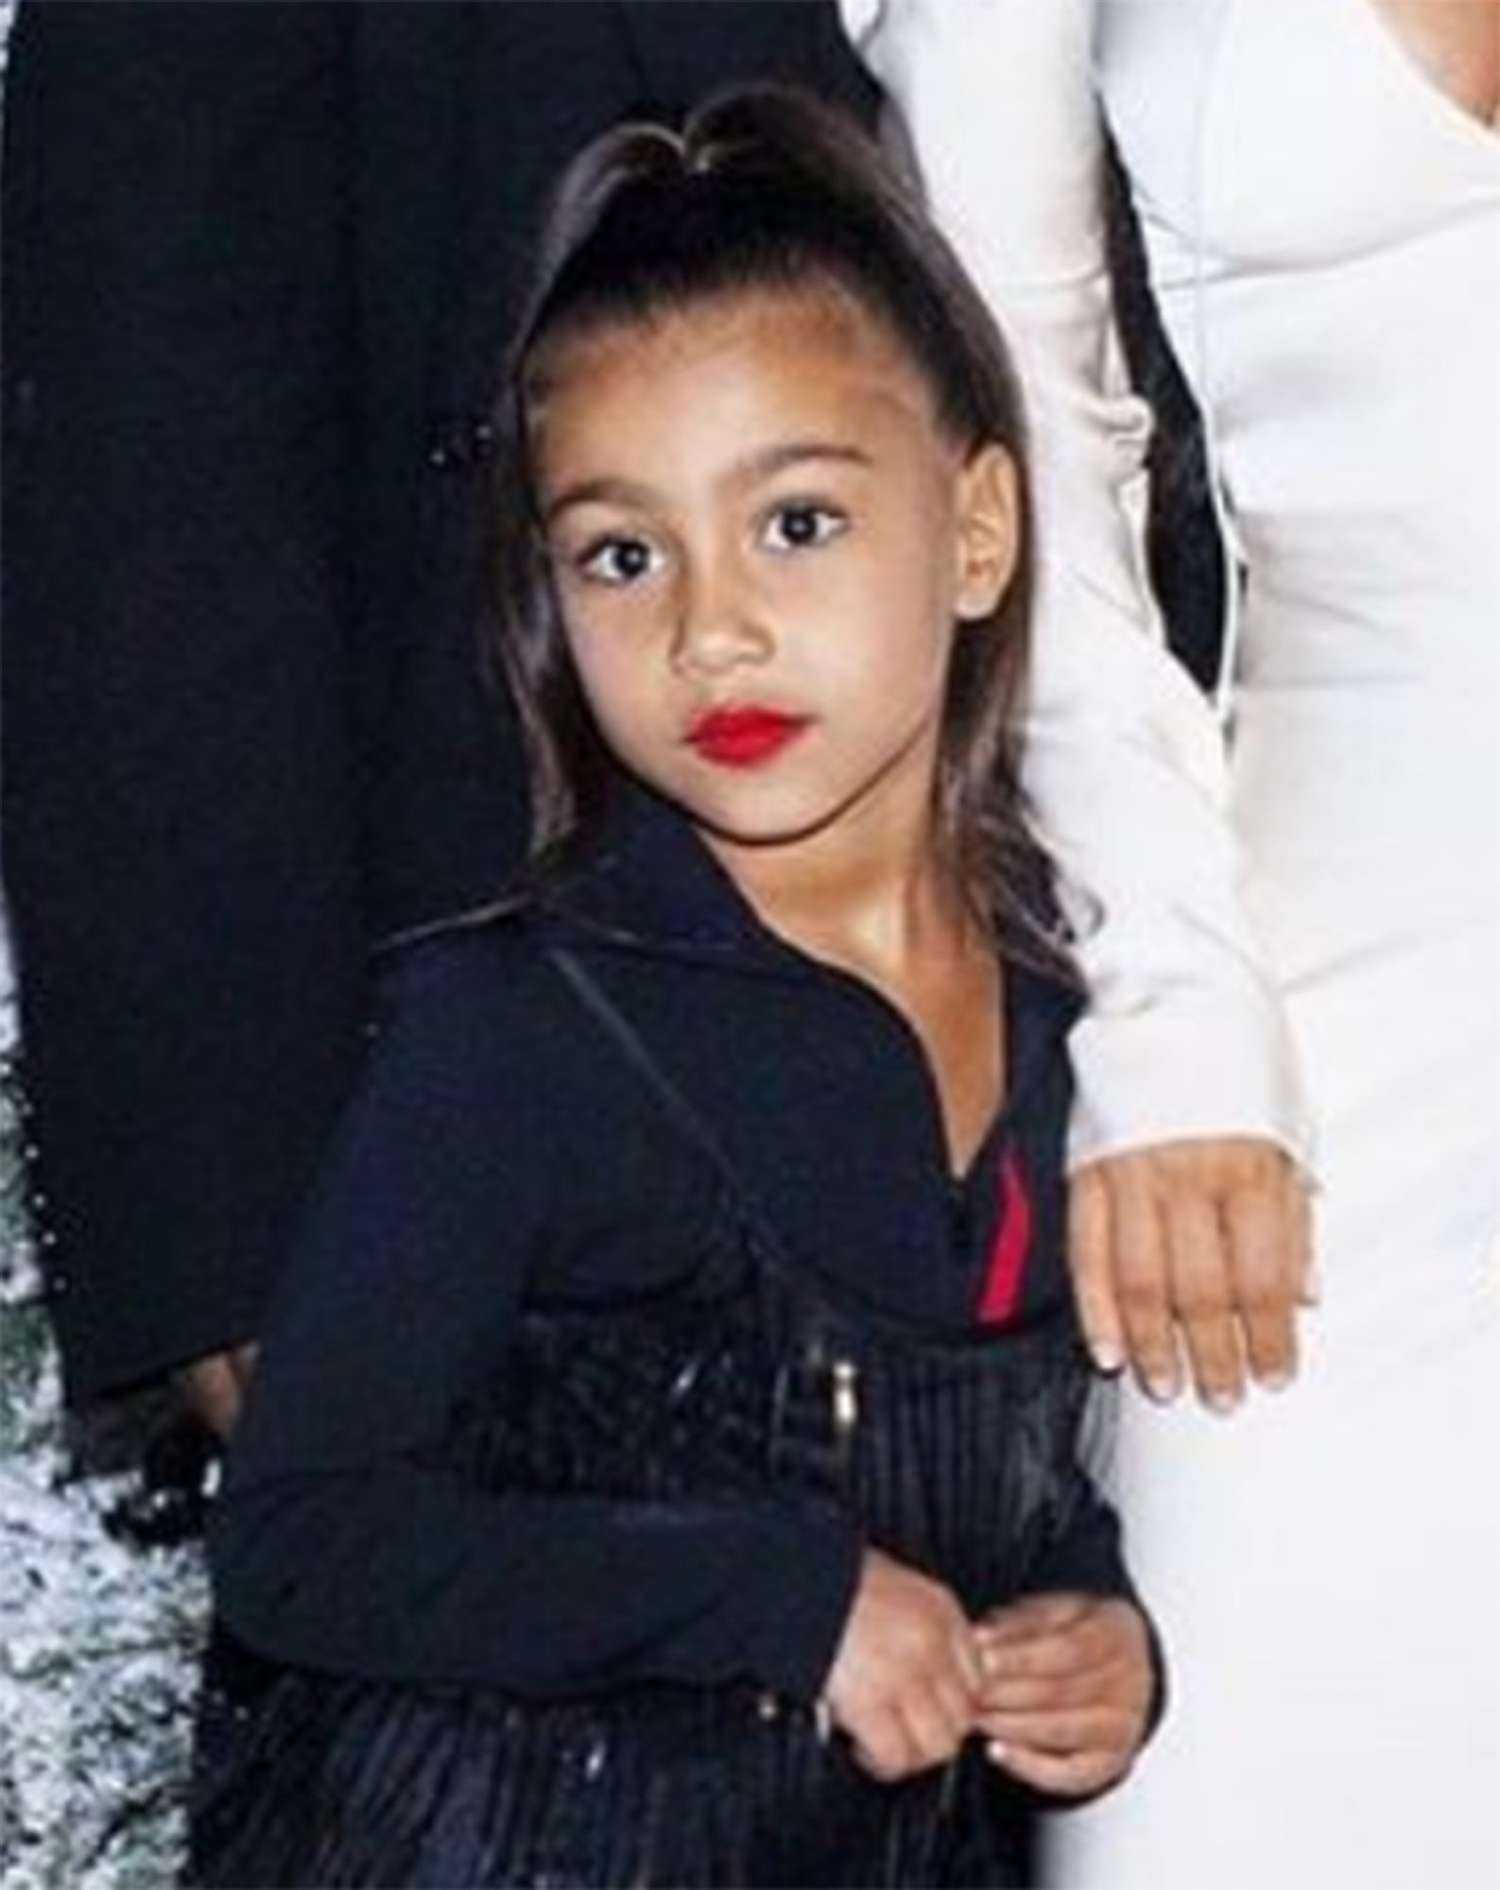 Kanye Isn't Cool with North Wearing Makeup